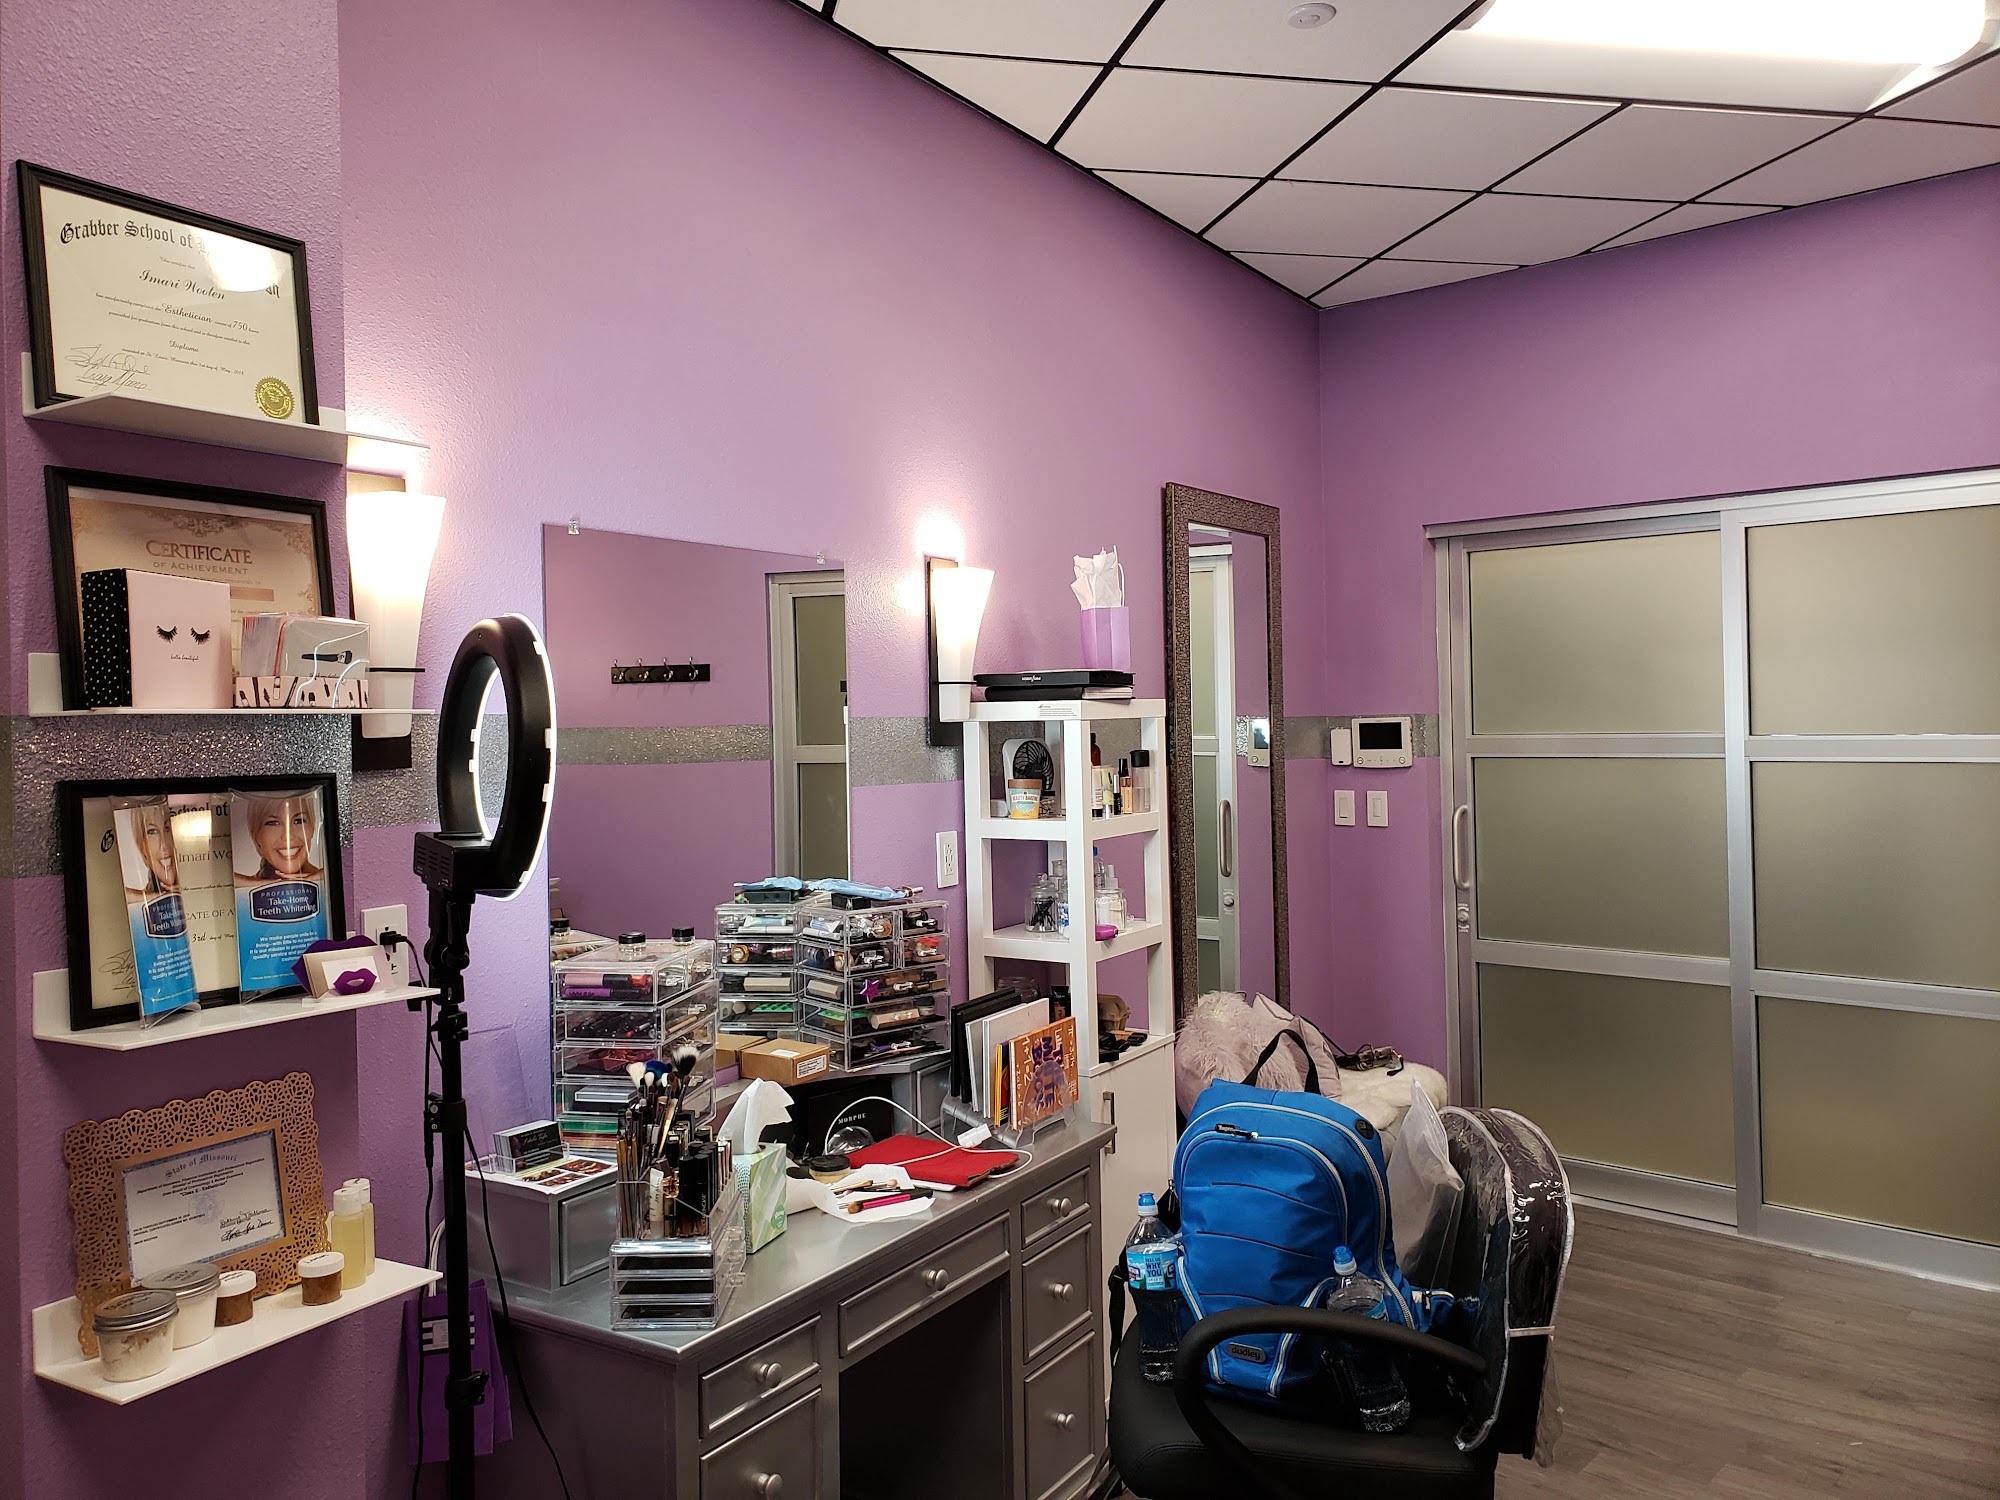 My Salon Suite of Manchester, MO, USA